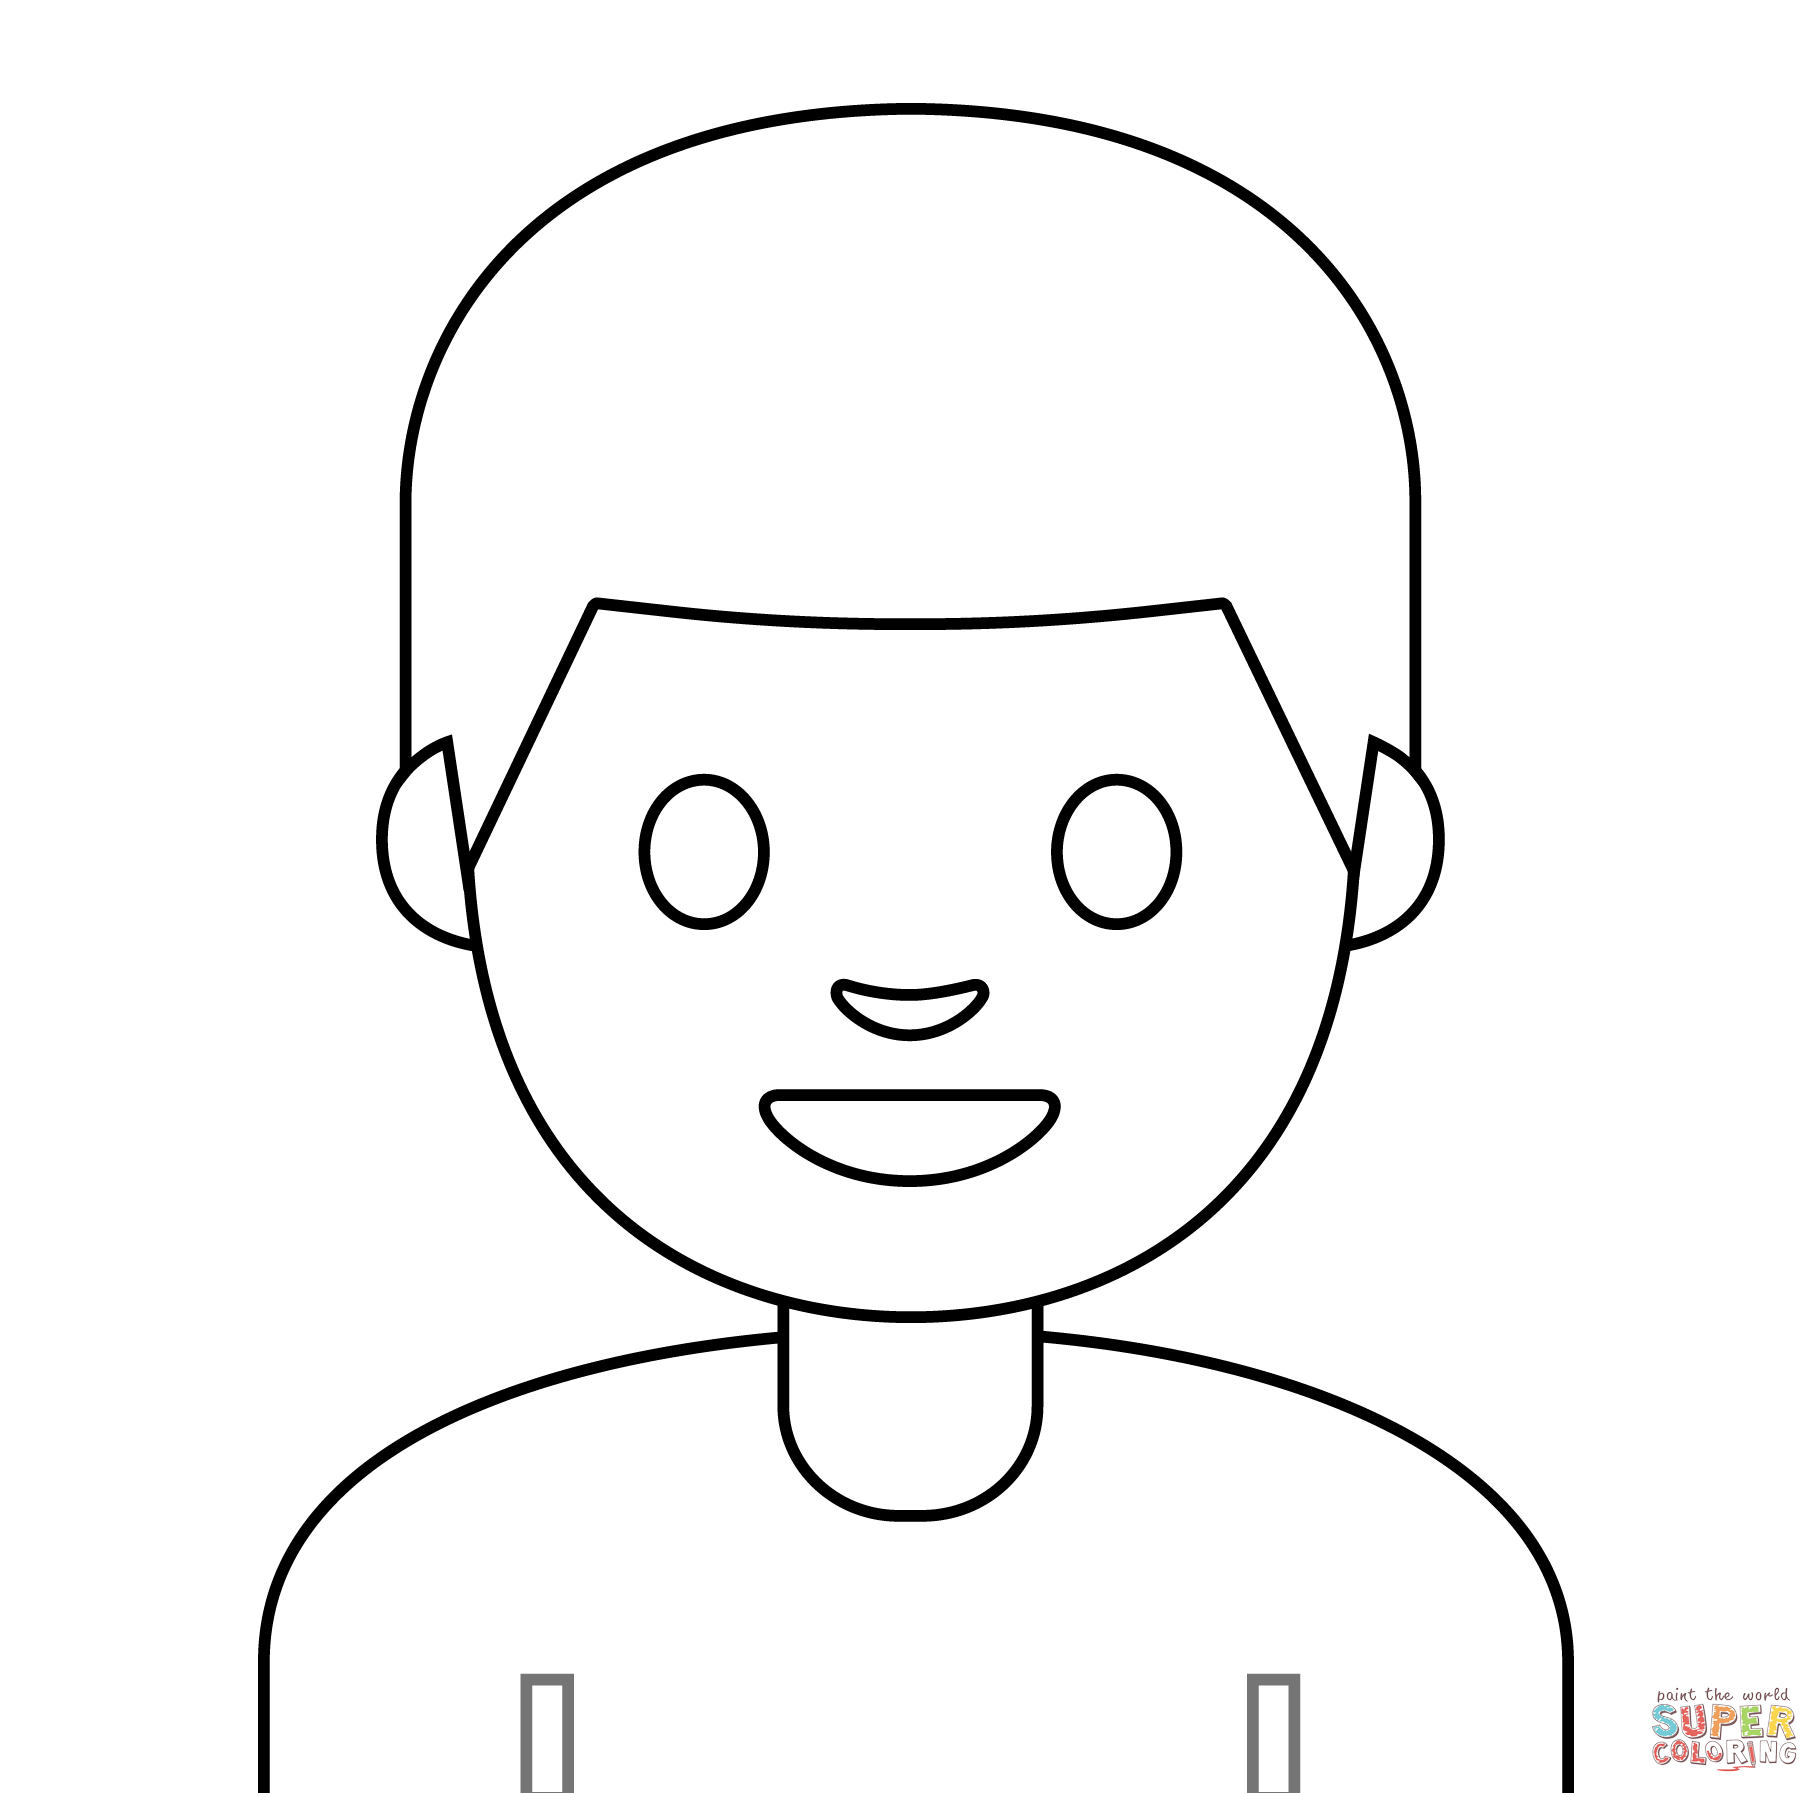 Person blond hair emoji coloring page free printable coloring pages